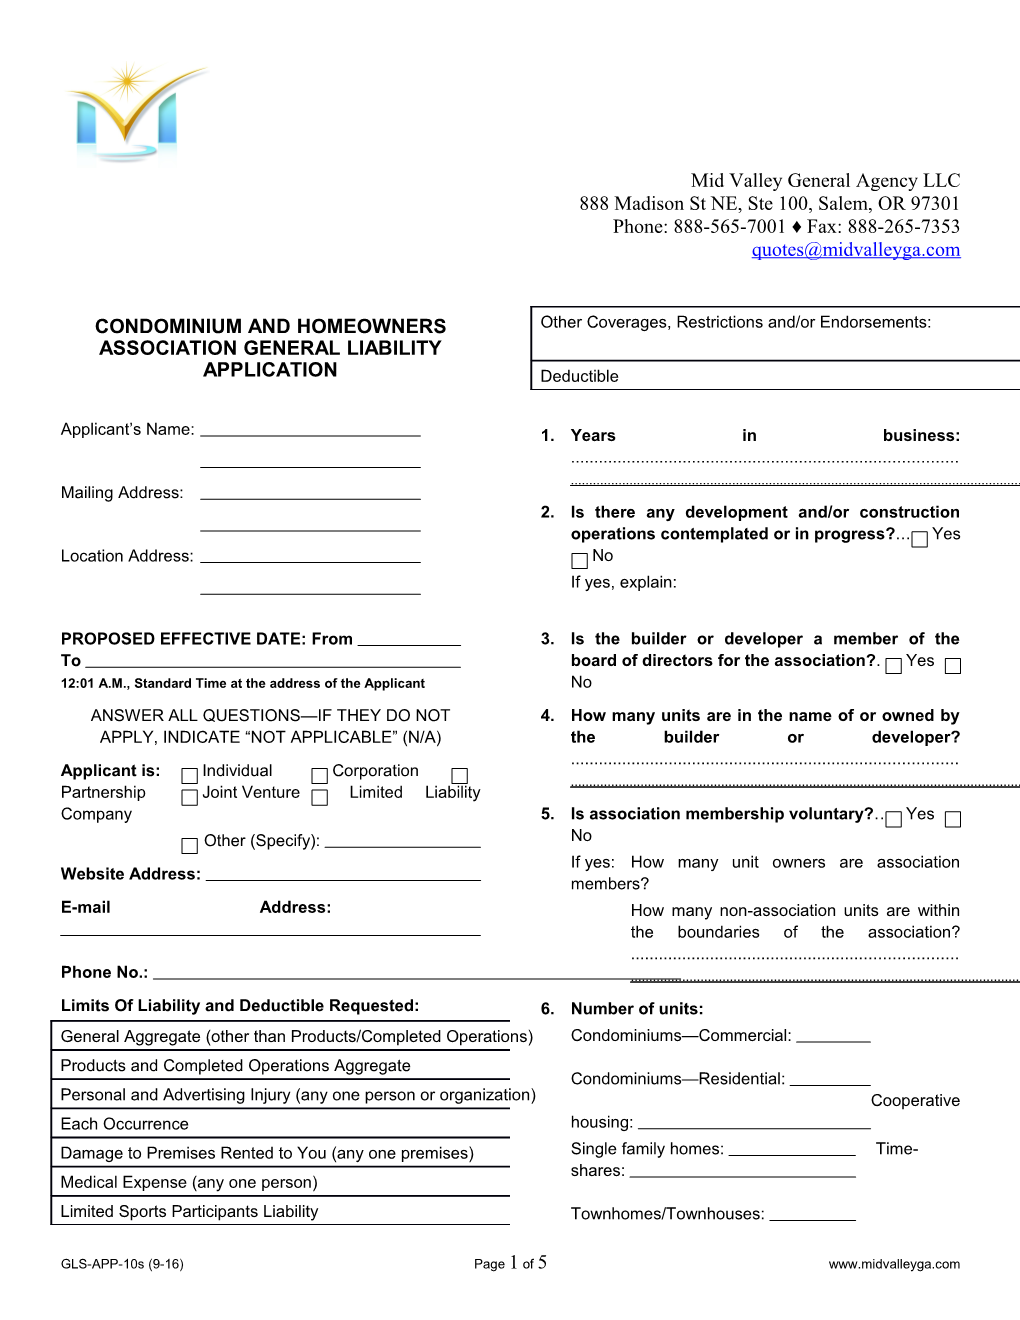 Condominium and Homeowners Association General Liability Application